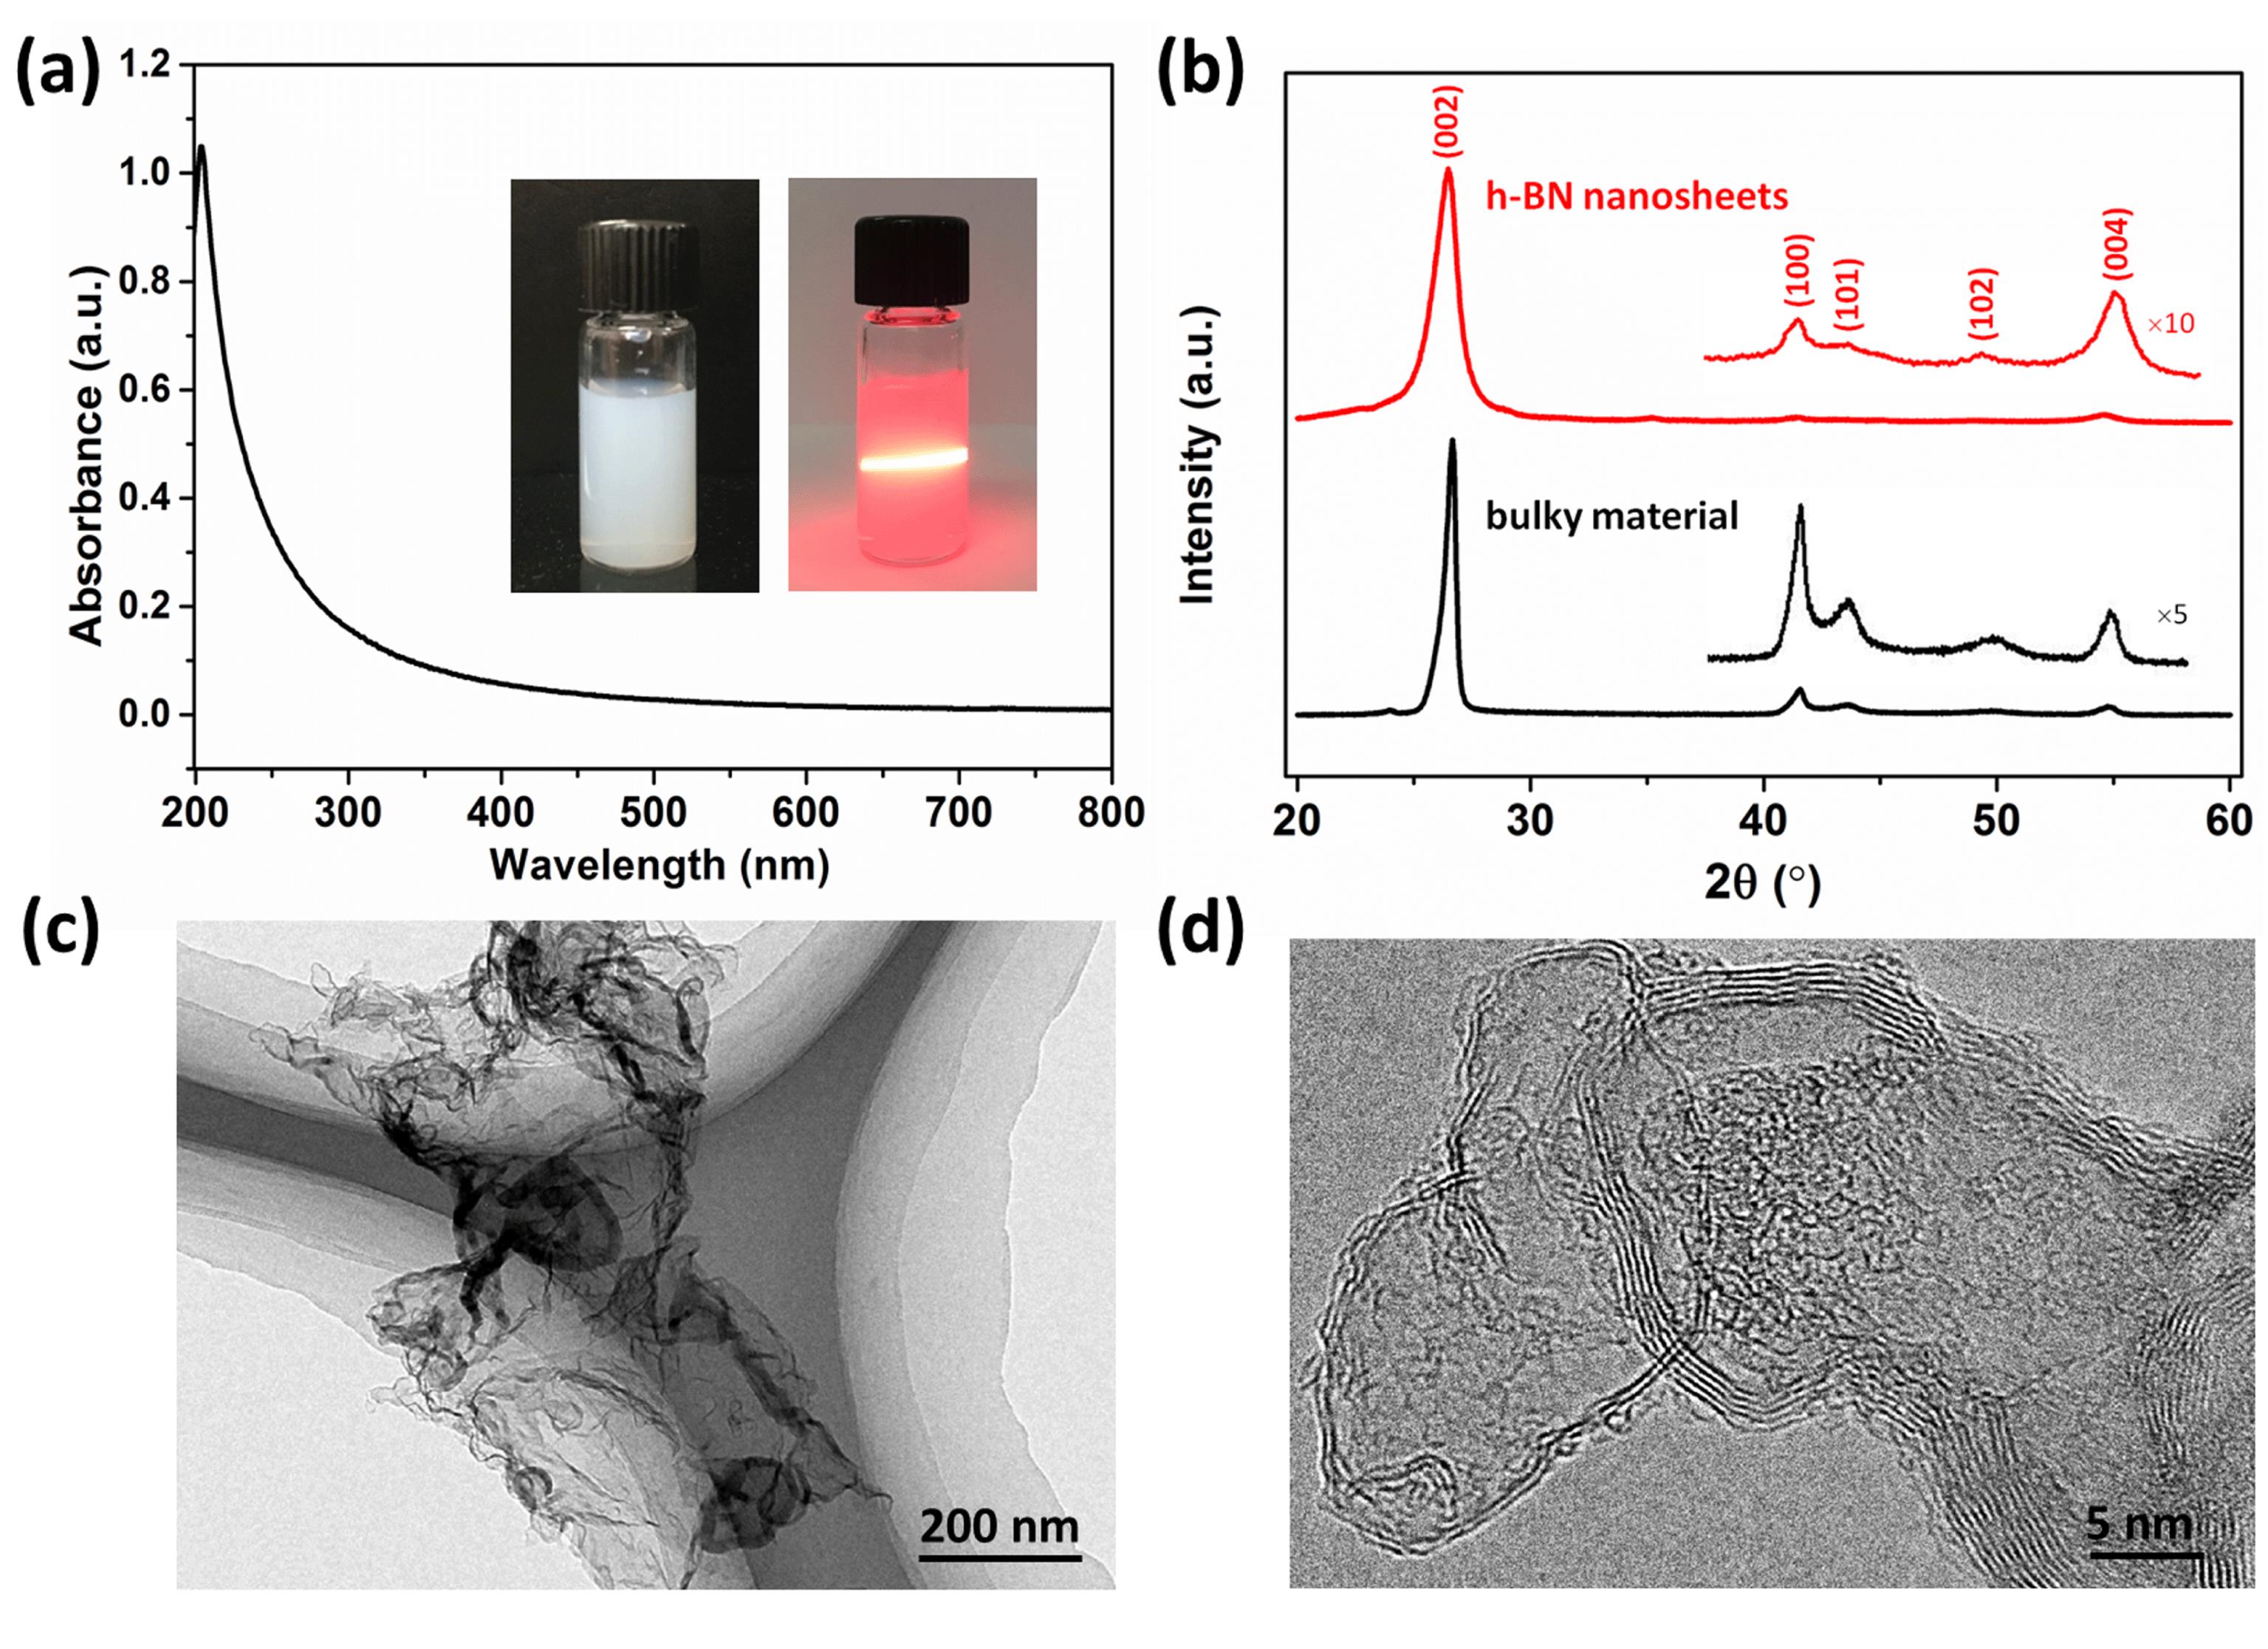 (a) Optical absorption of BN nanosheets dispersion in ethanol. Inset: photographs of BN nanosheets dispersion in water (left) and ethanol (right). (b) XRD patterns of BN nanosheets we used here and h-BN bulky material. Inset: the curves in the region of –. (c) TEM and (d) HRTEM images of BN nanosheets.